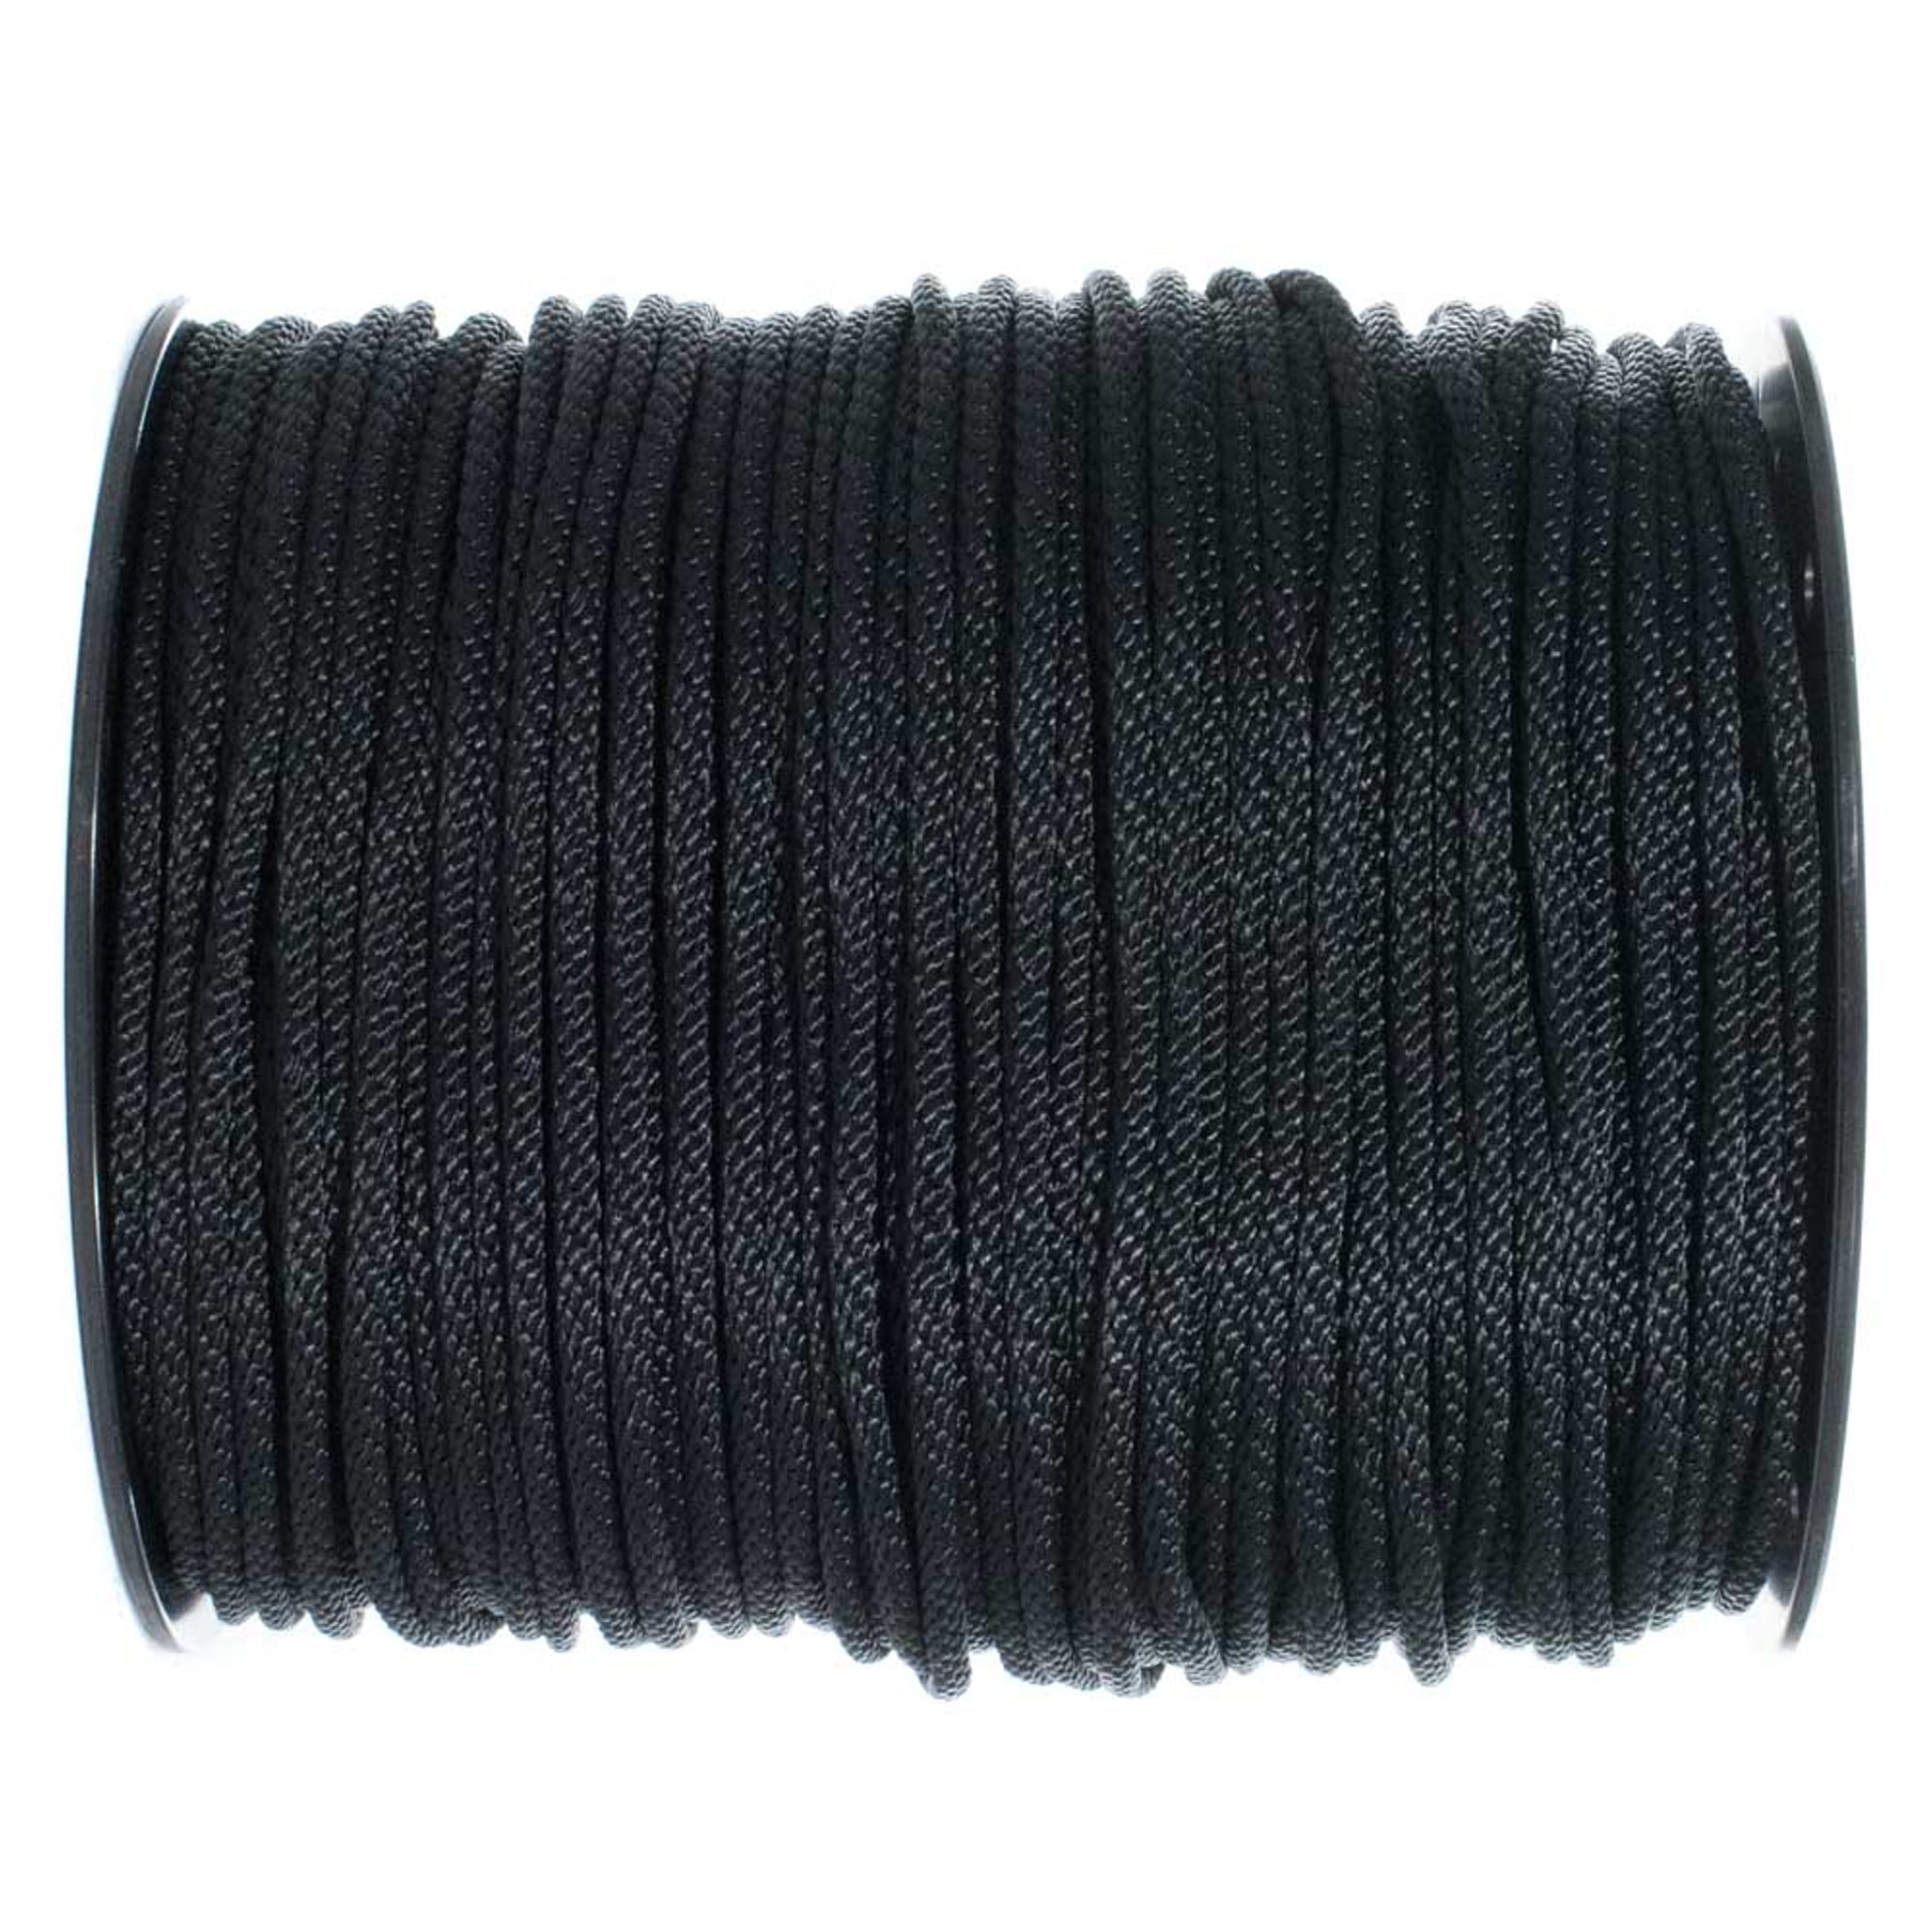 Solid Braid Poly Cotton Rope – 3/8, 1/4, 3/16, and 1/8 Inch Sizes